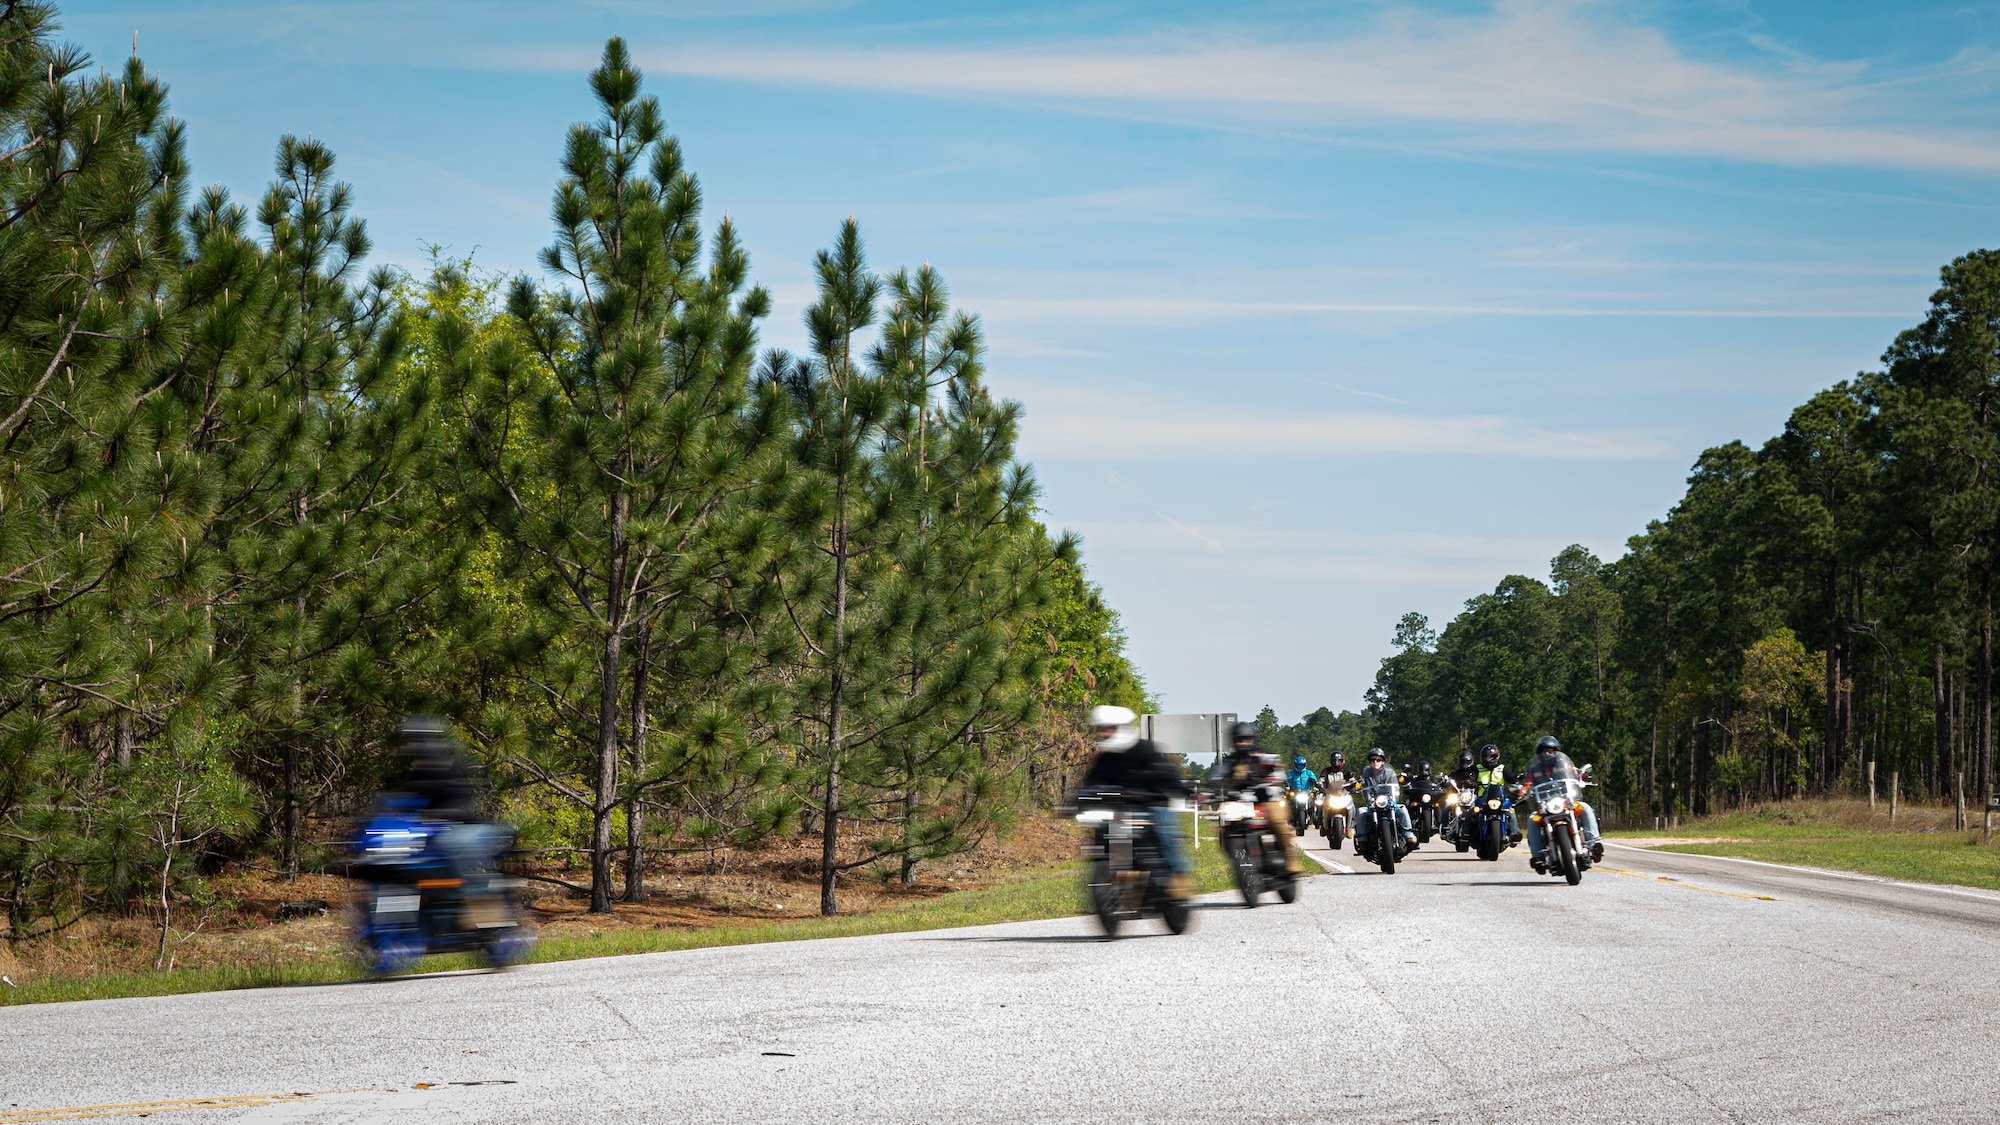 A group of motorcycle riders make a turn in the road.